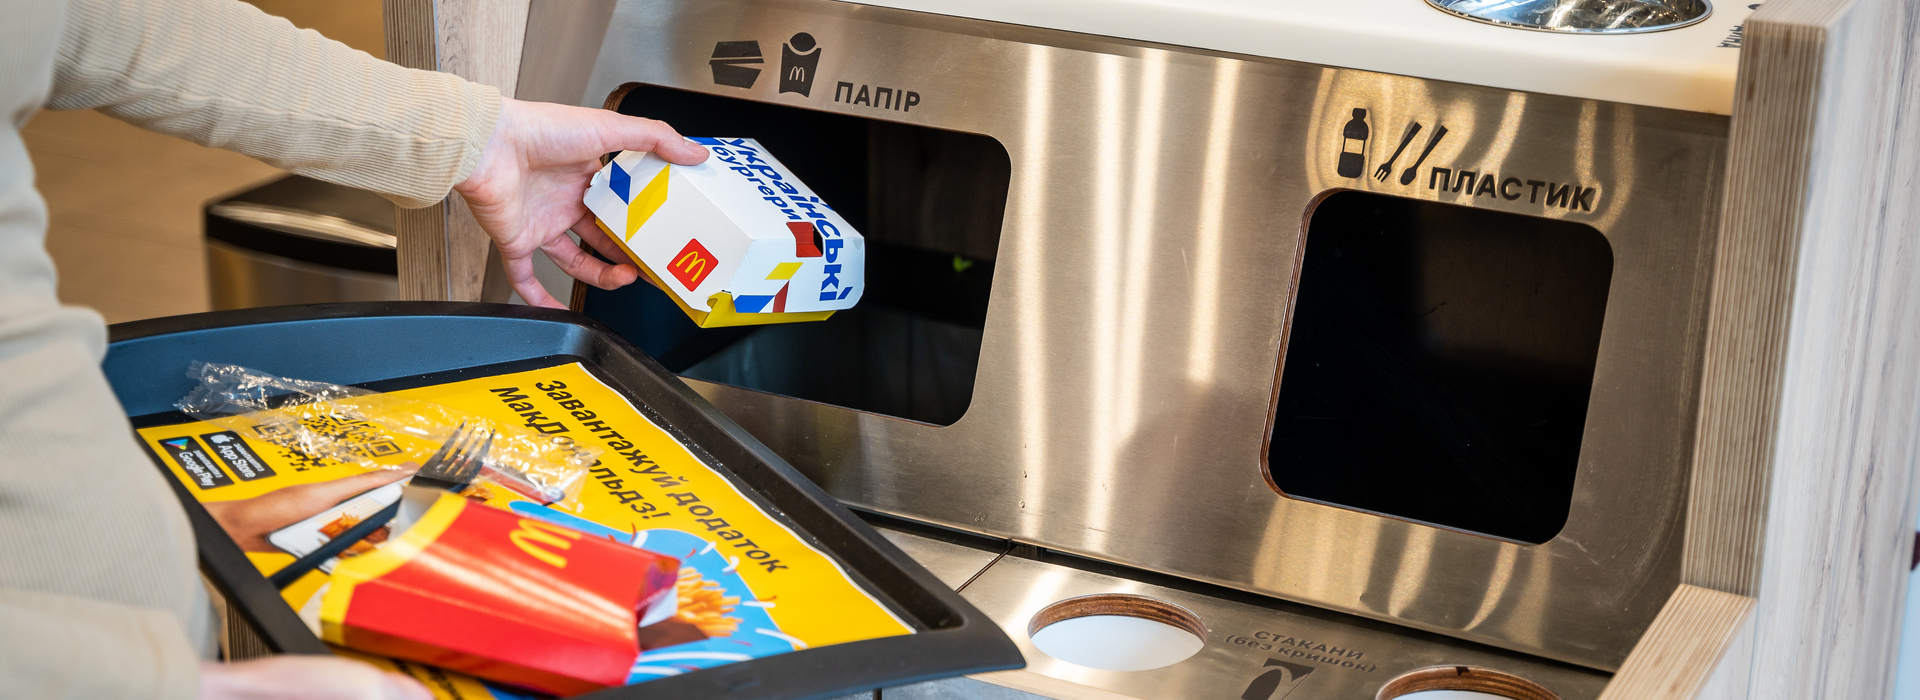 “Sort – We Will Recycle”: McDonald’s Has Introduced Sorting and Recycling of Waste in the Halls of Restaurants Throughout Ukraine